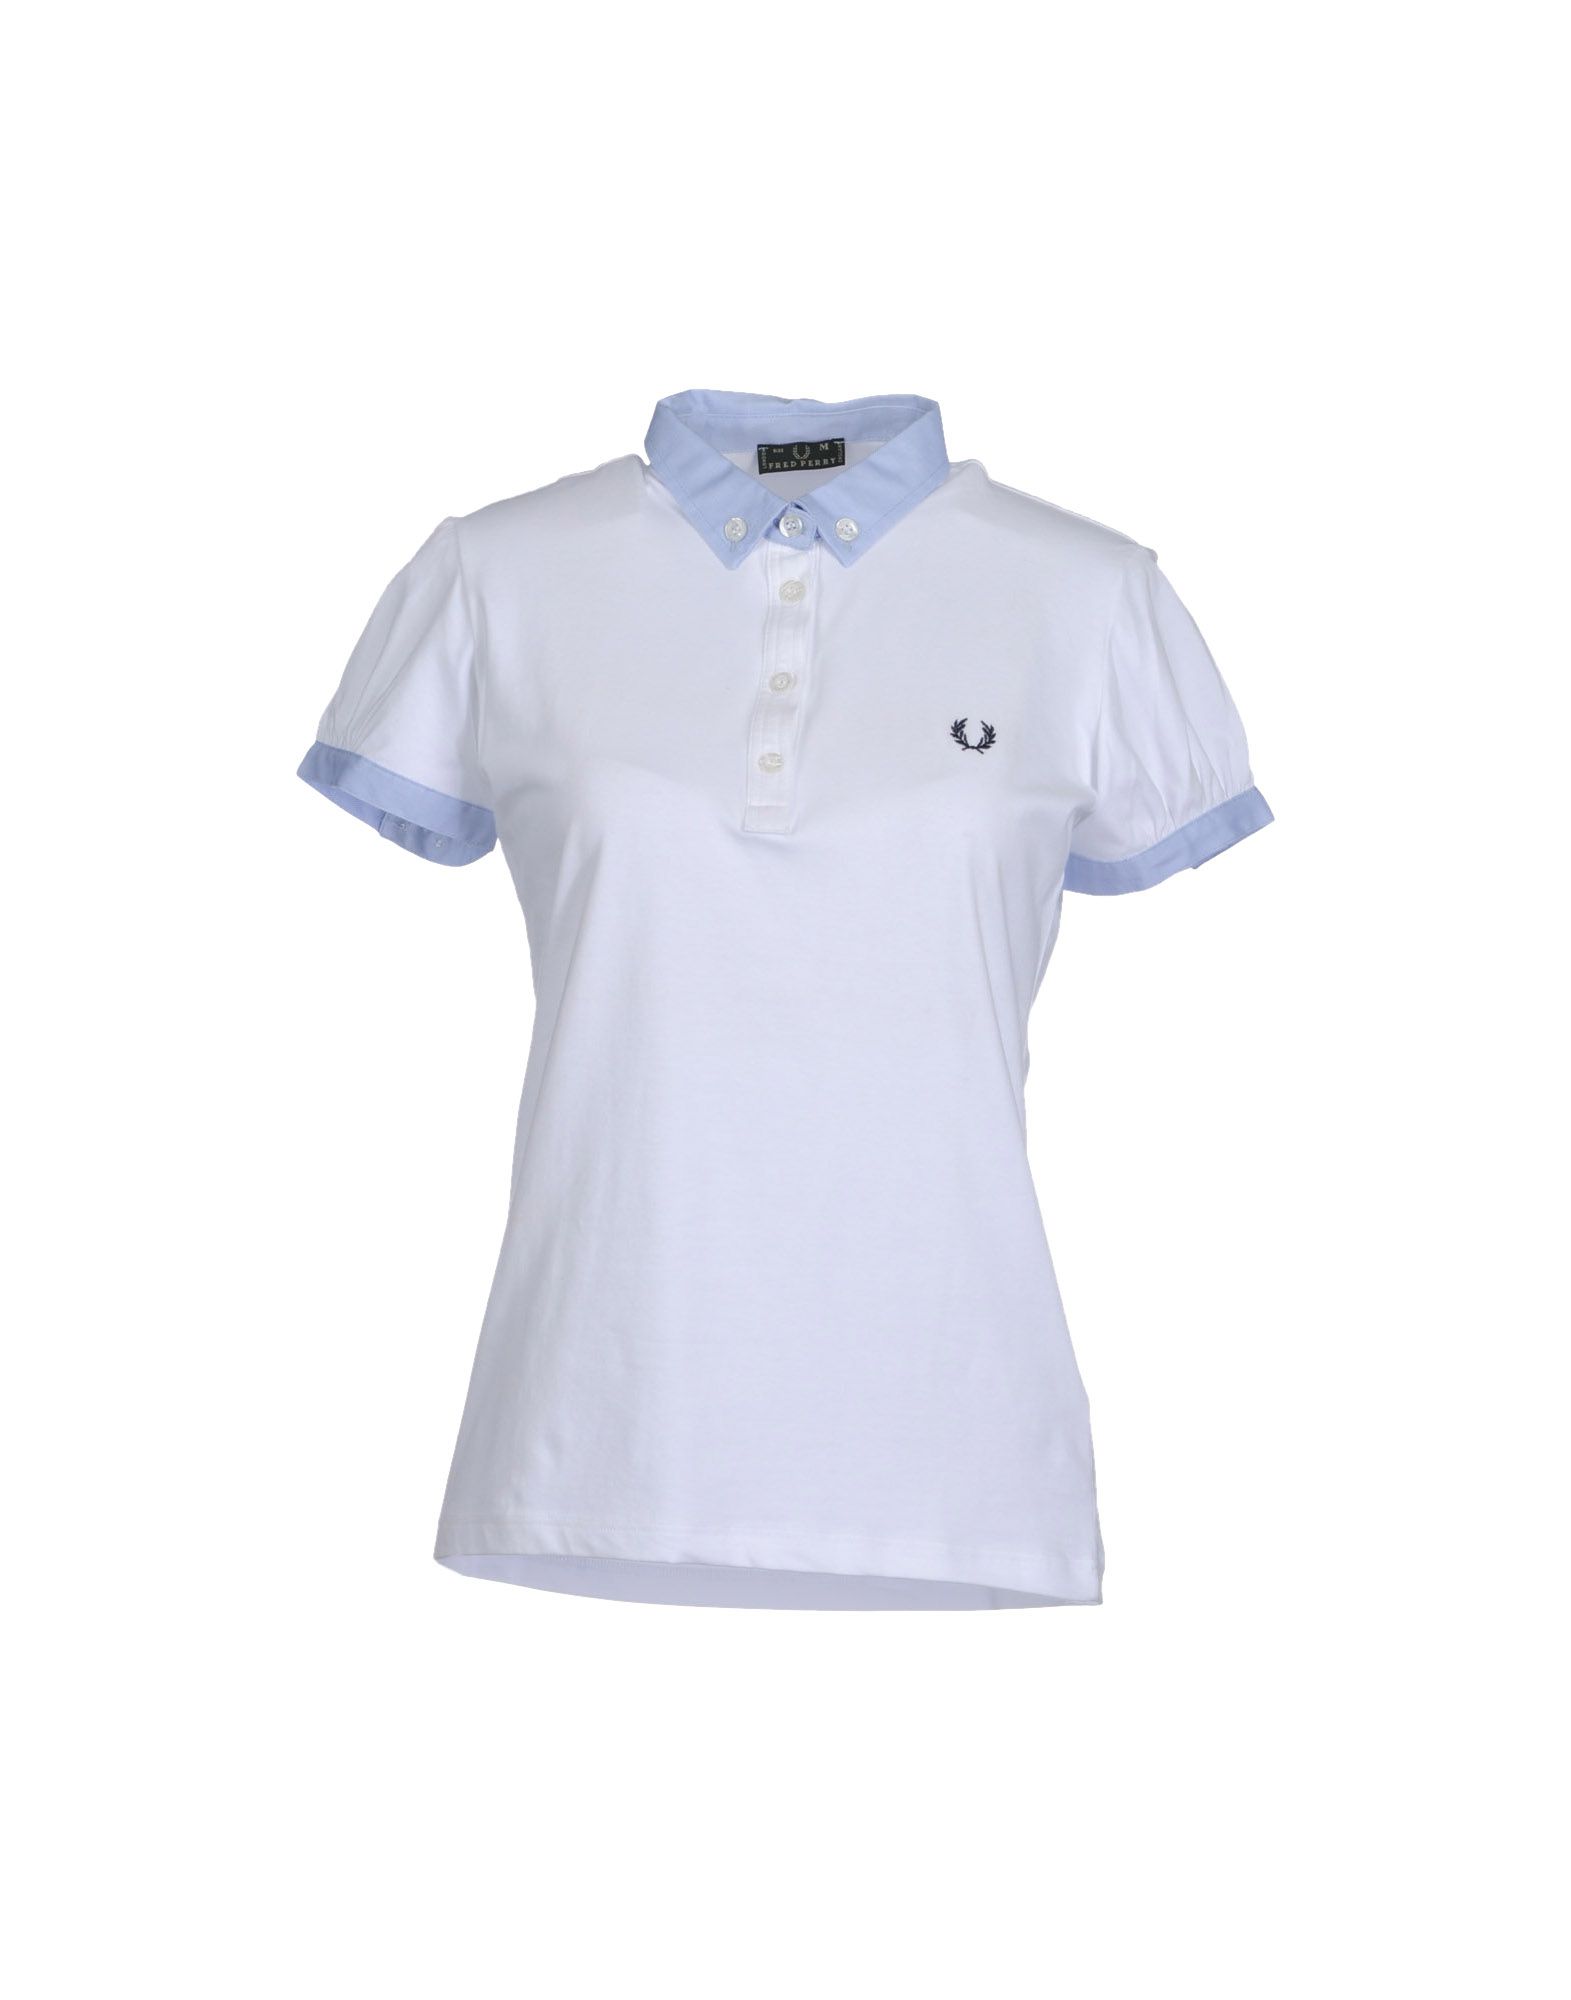 Foto fred perry polos
 foto 93561